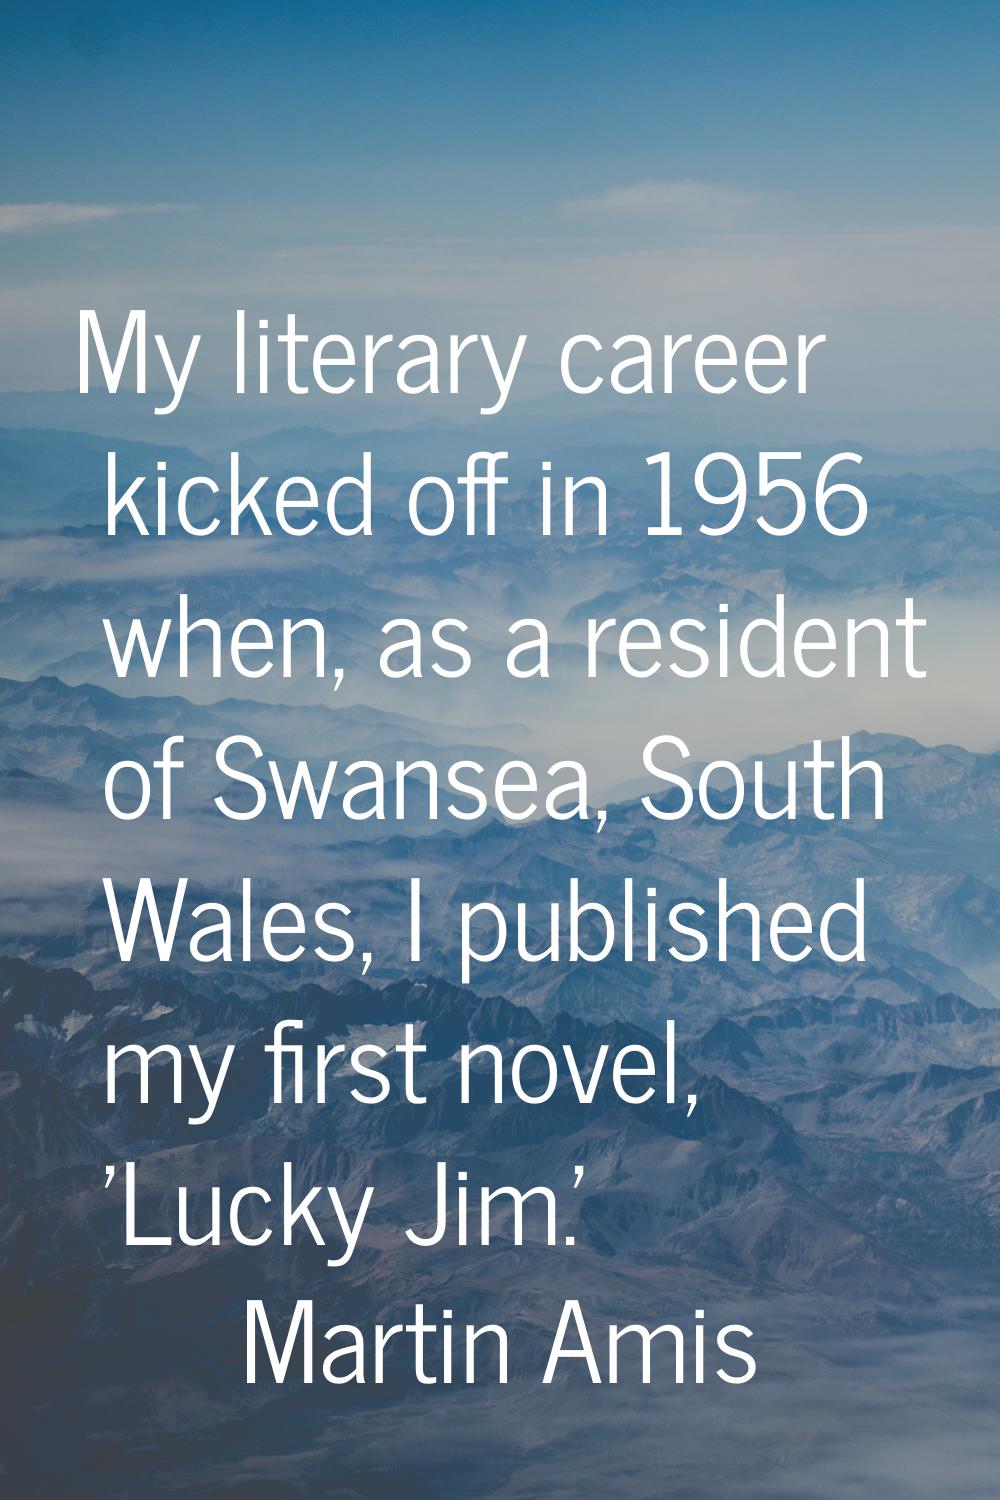 My literary career kicked off in 1956 when, as a resident of Swansea, South Wales, I published my f